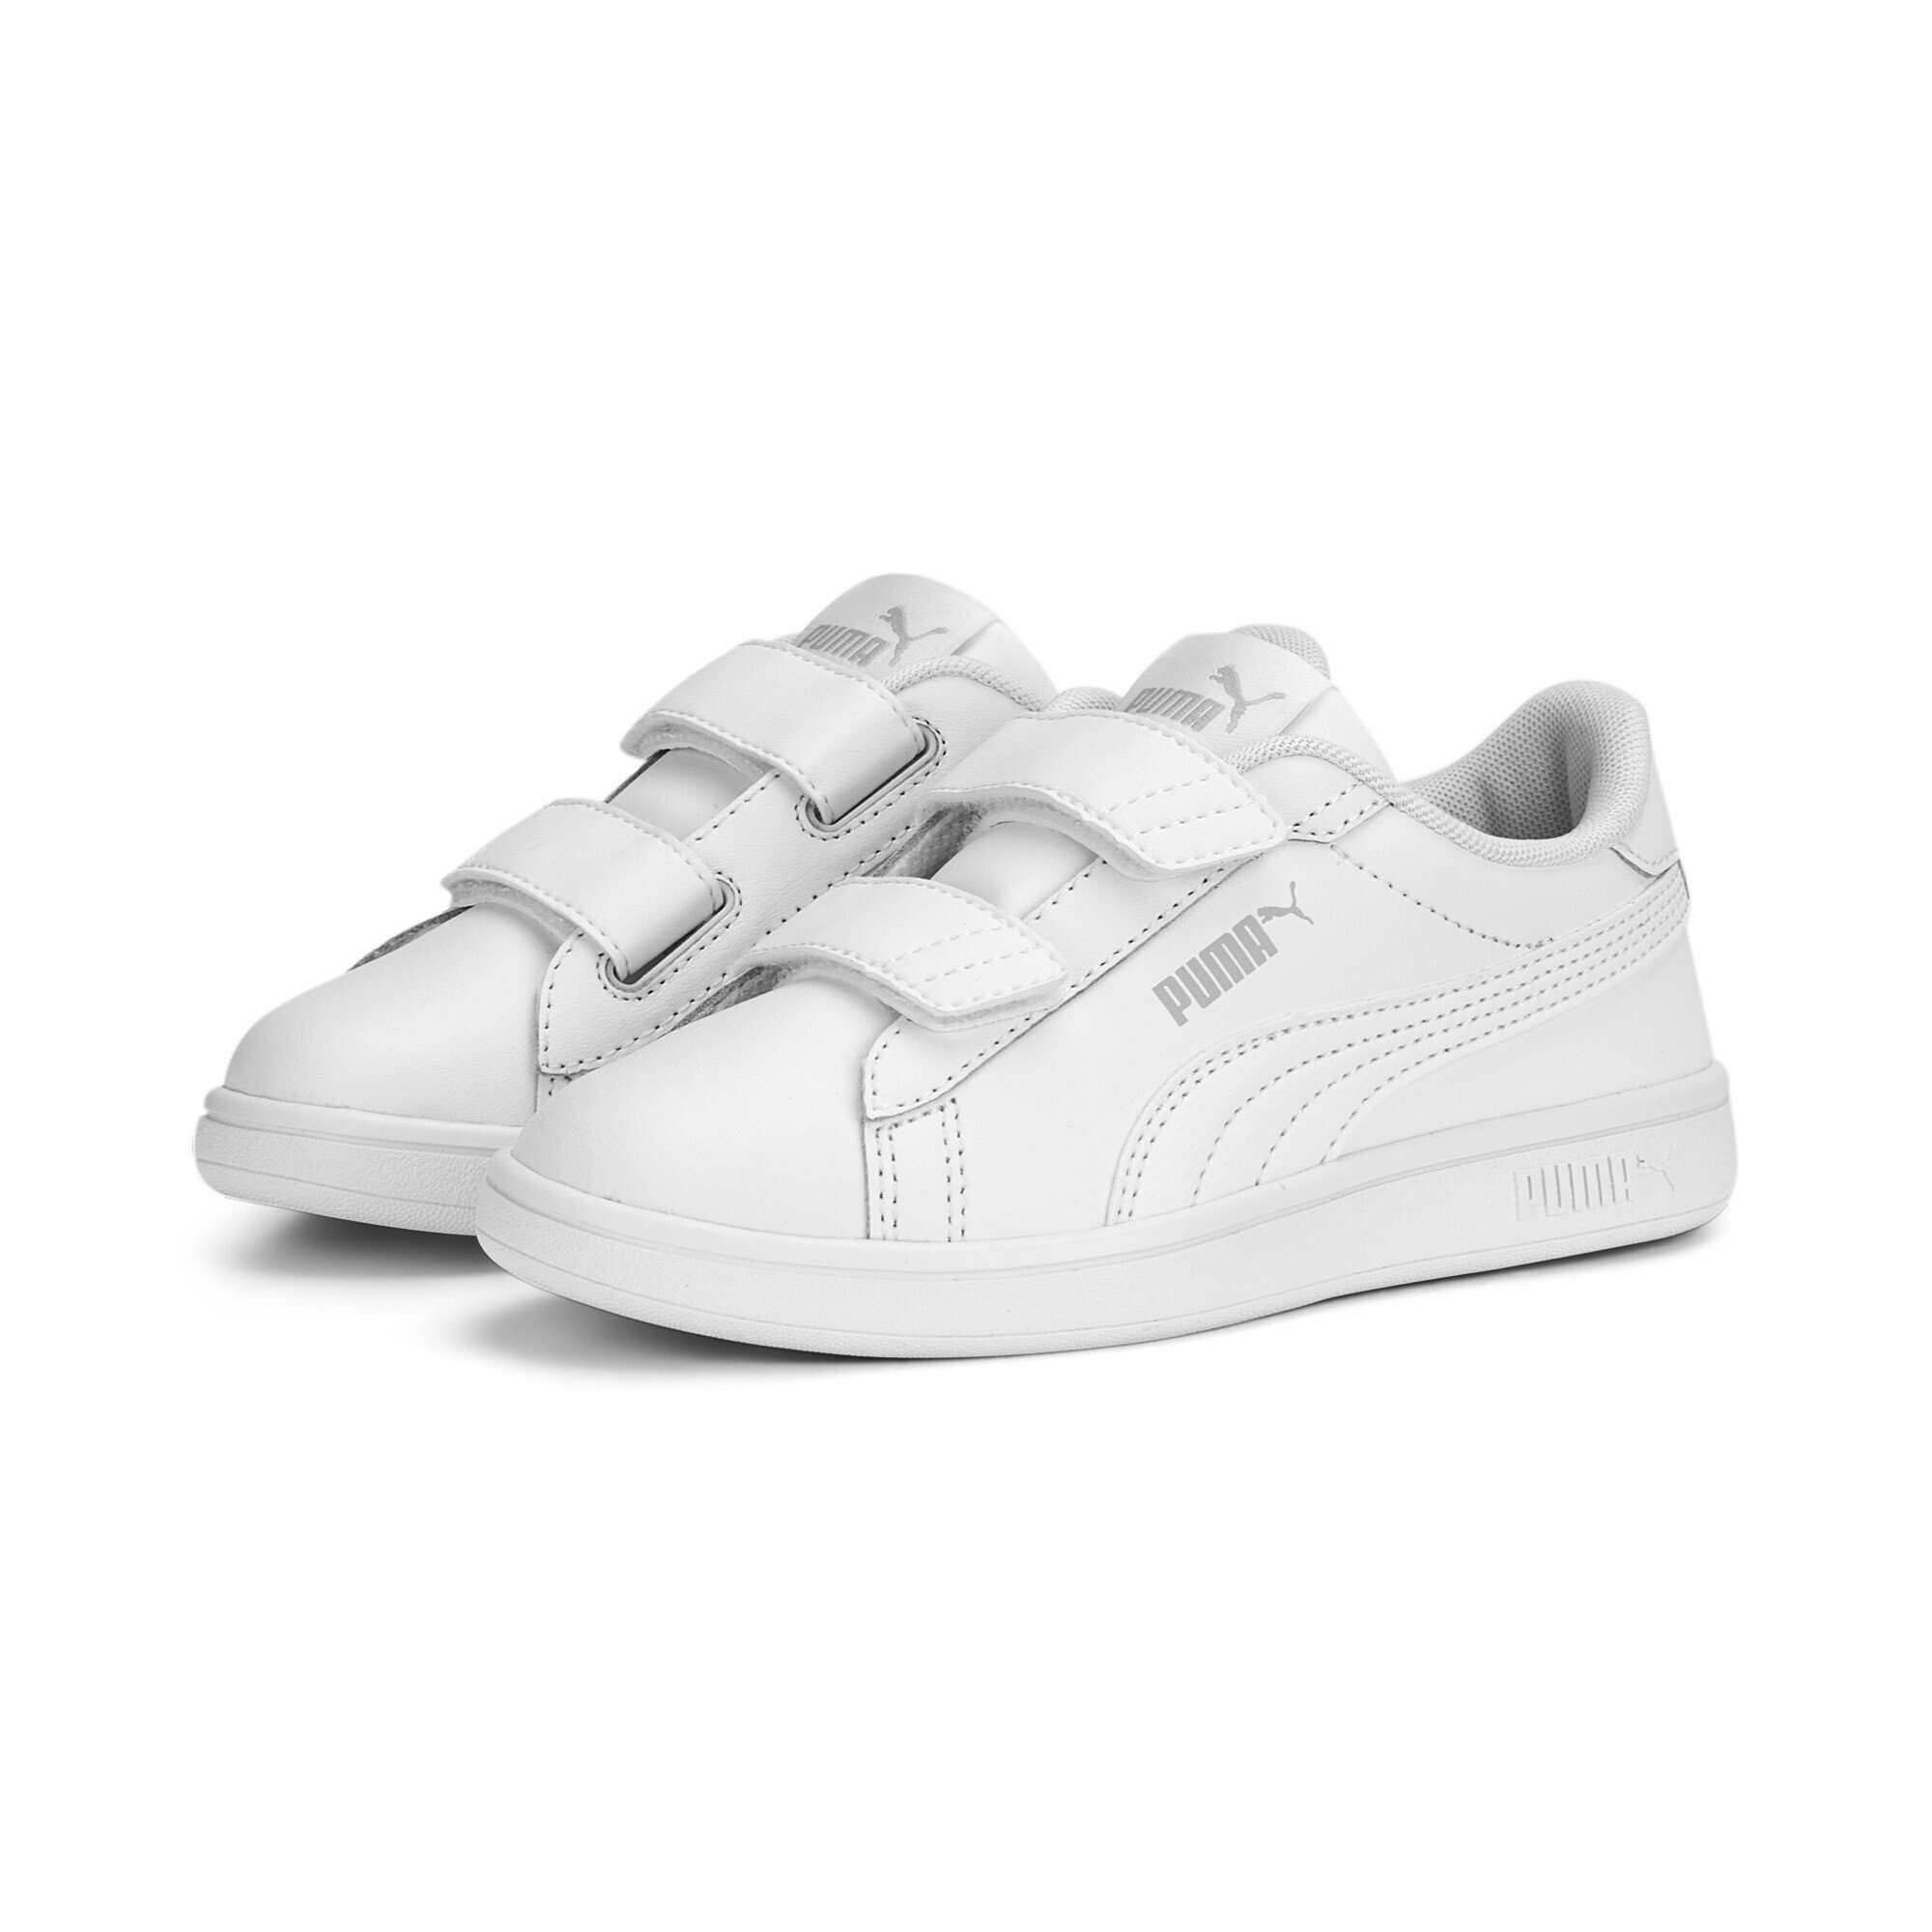 PUMA Smash 3.0 Leather Sneakers Sneaker White Cool Light Gray